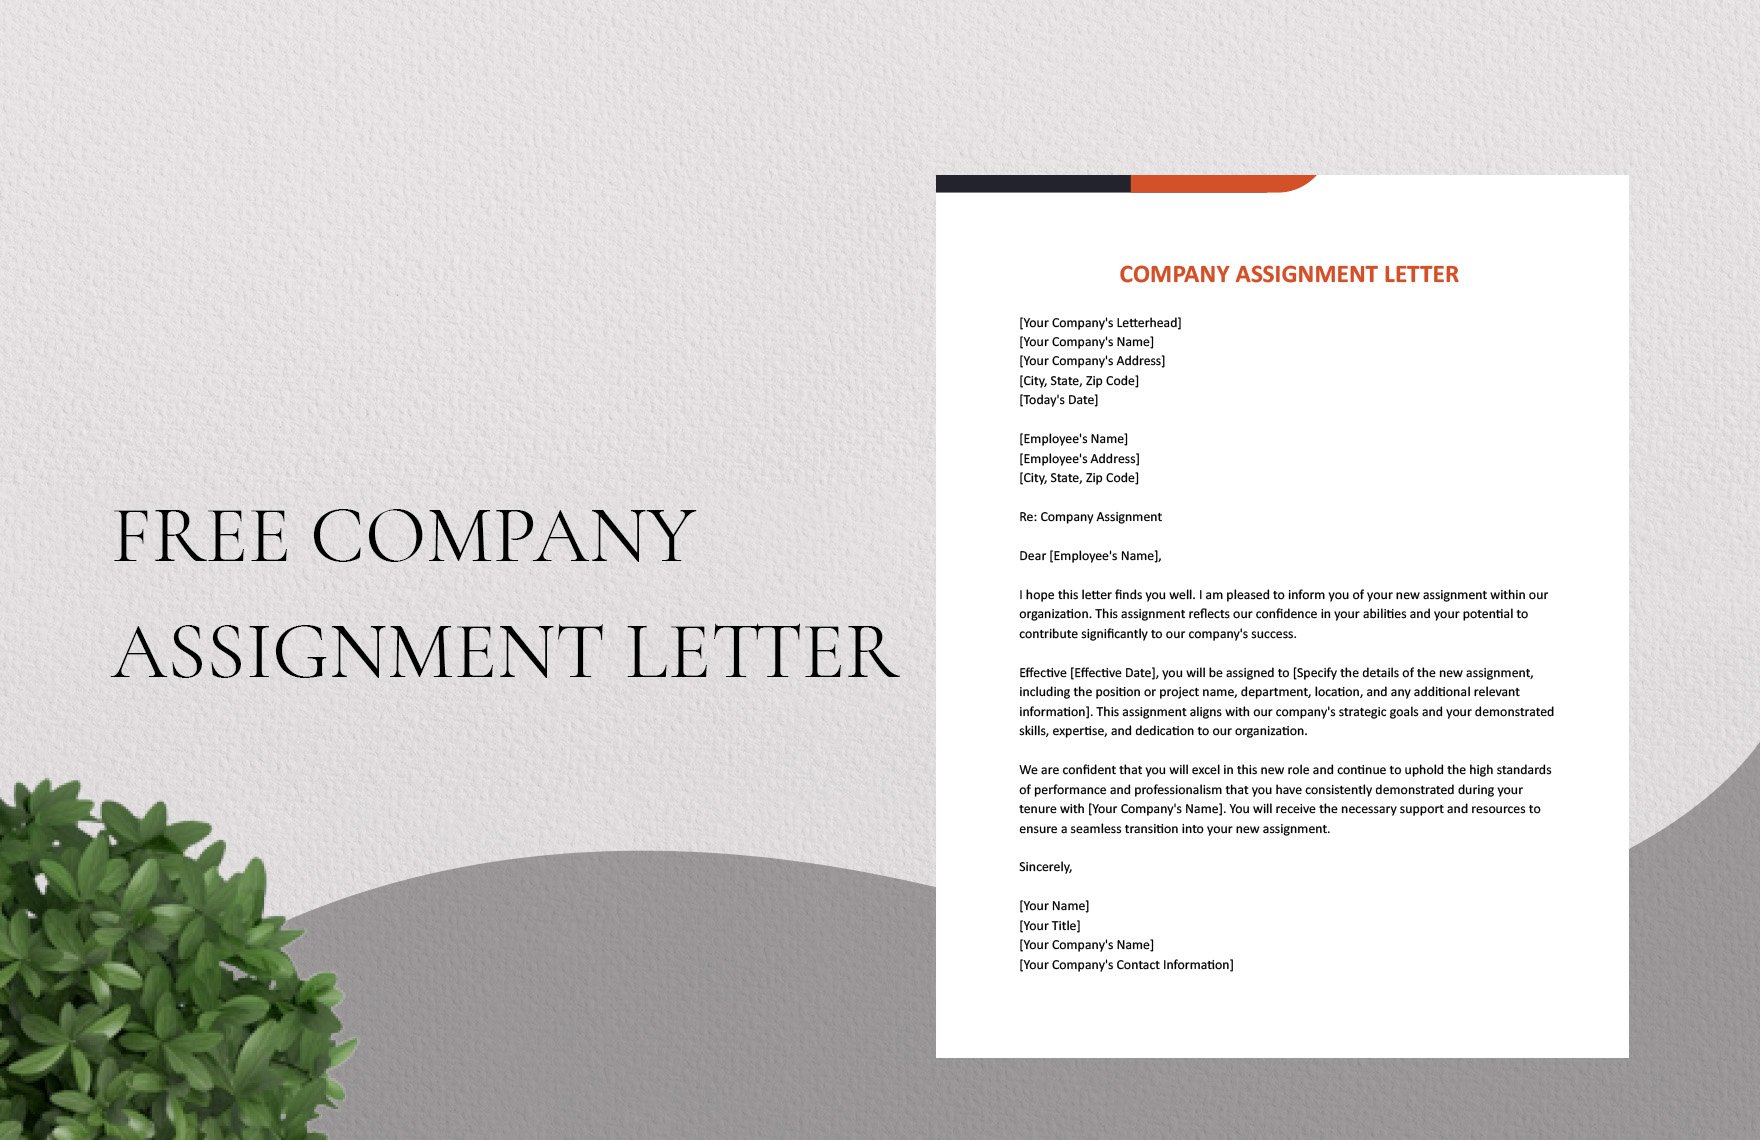 letter of assignment media template